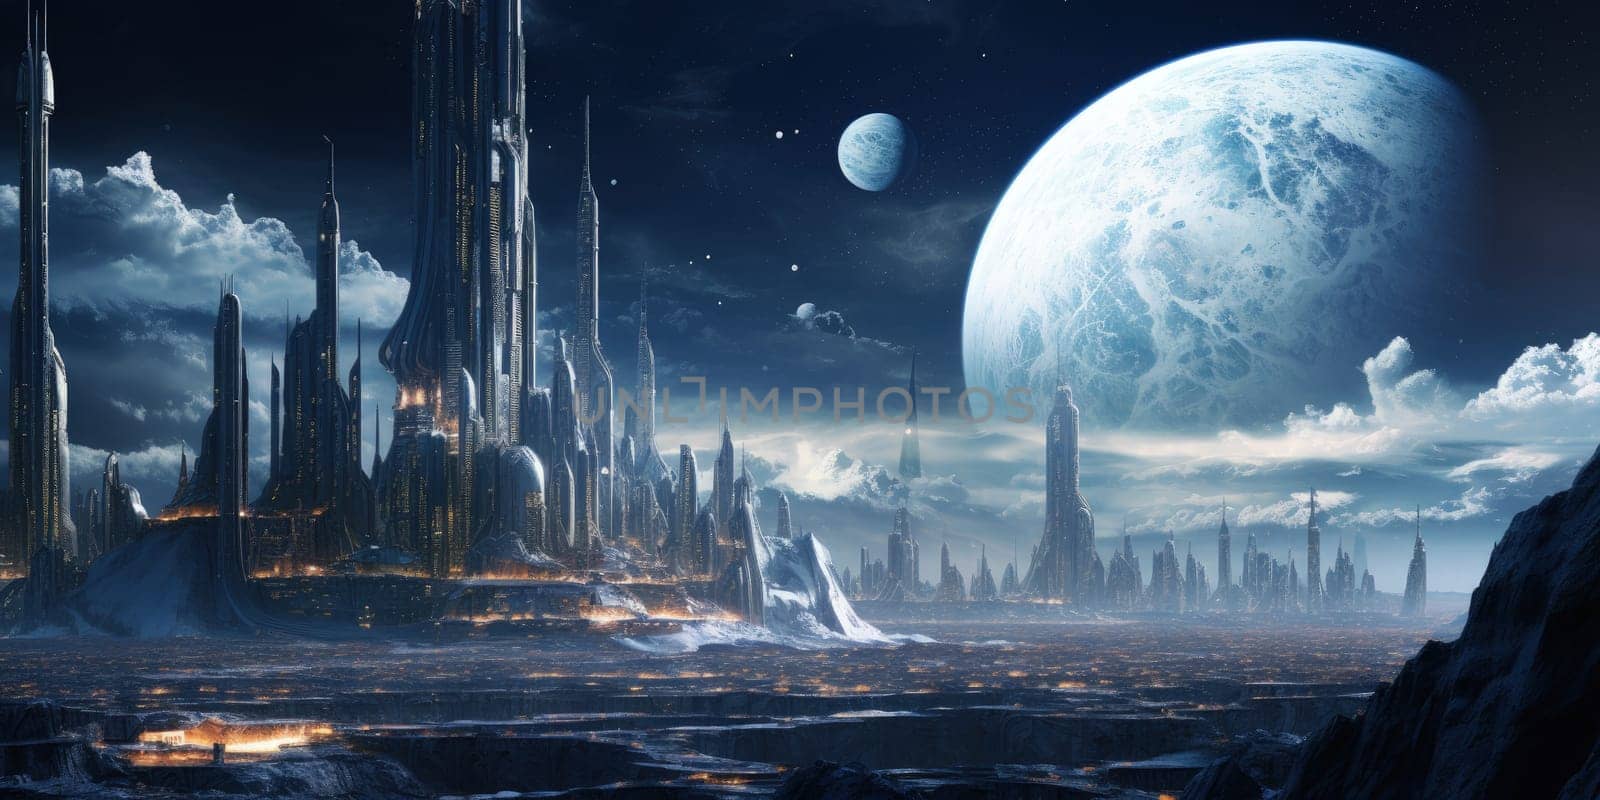 Alien cityscape sprawling across a lunar surface, with towering structures, bioluminescent pathways and unique architectural designs